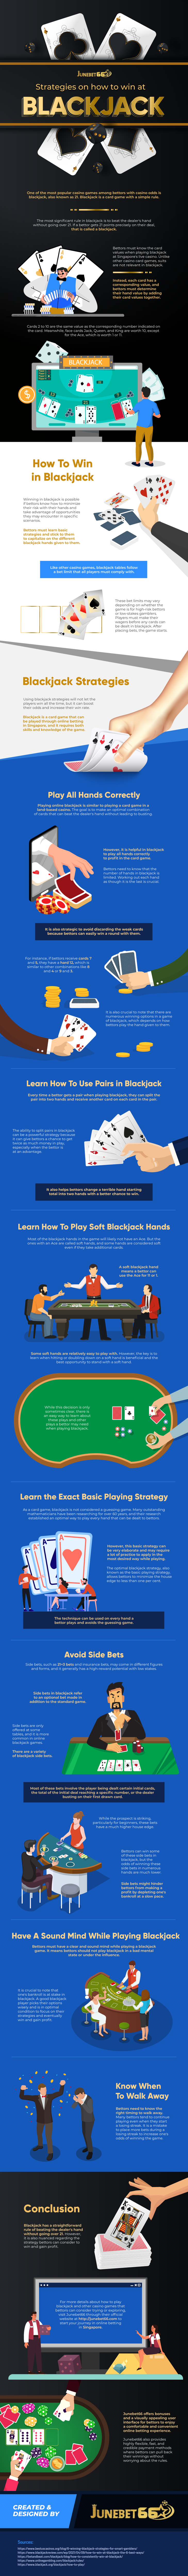 how to win at Blackjack